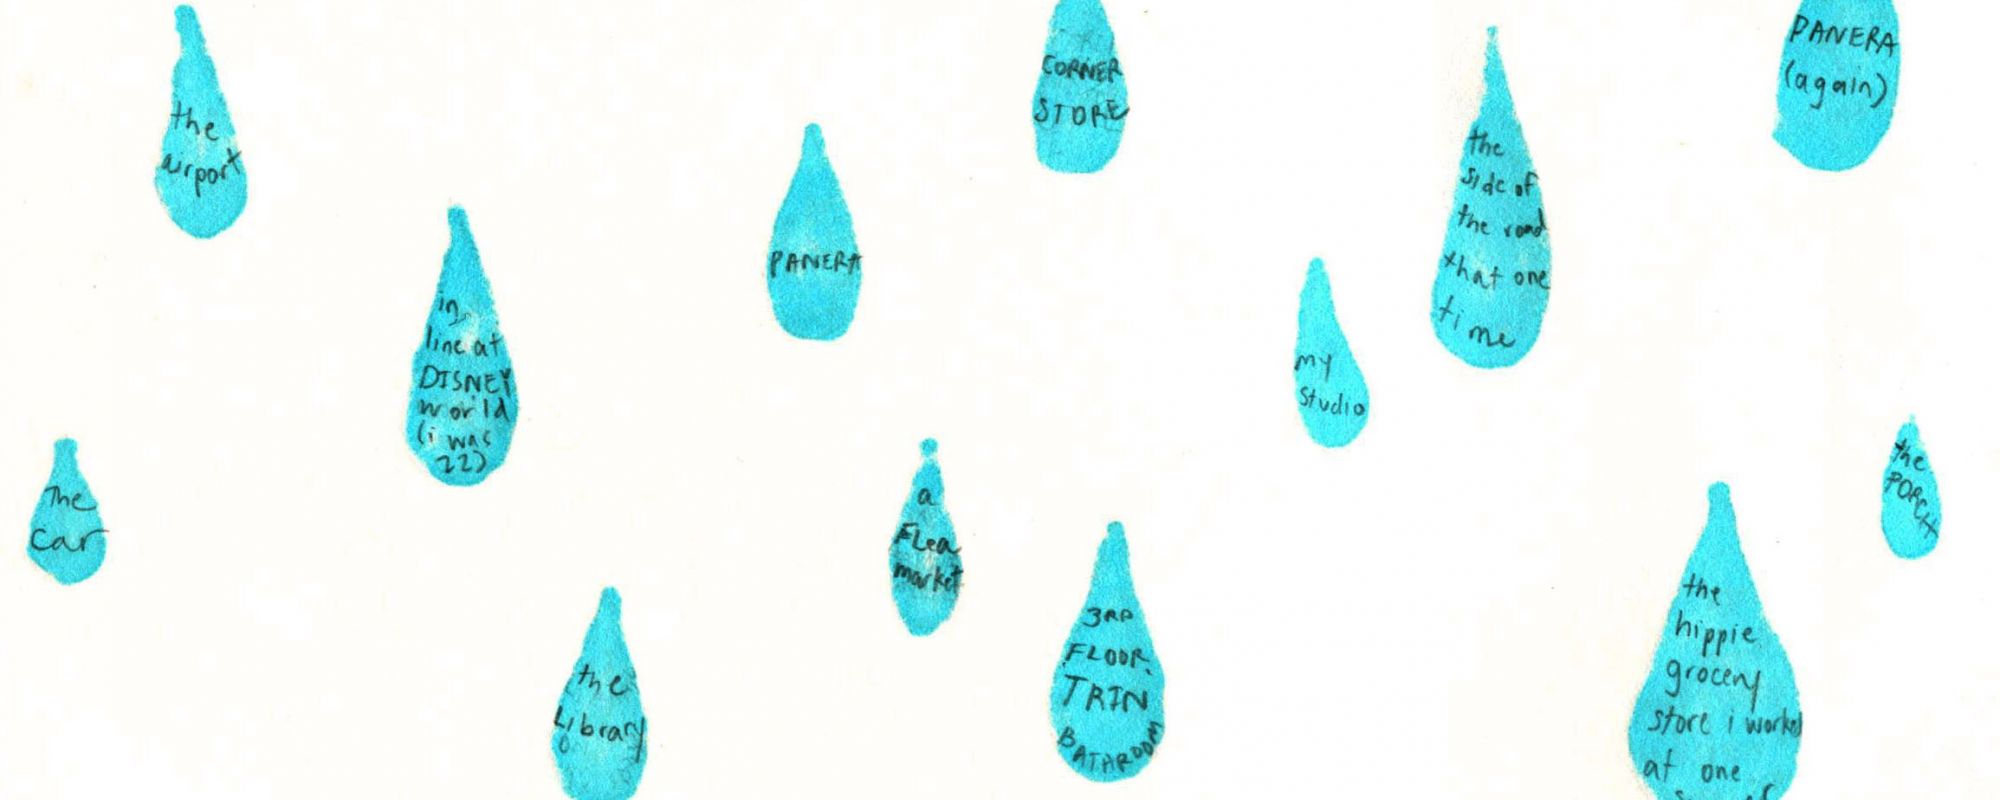 Hand-drawn images of tears